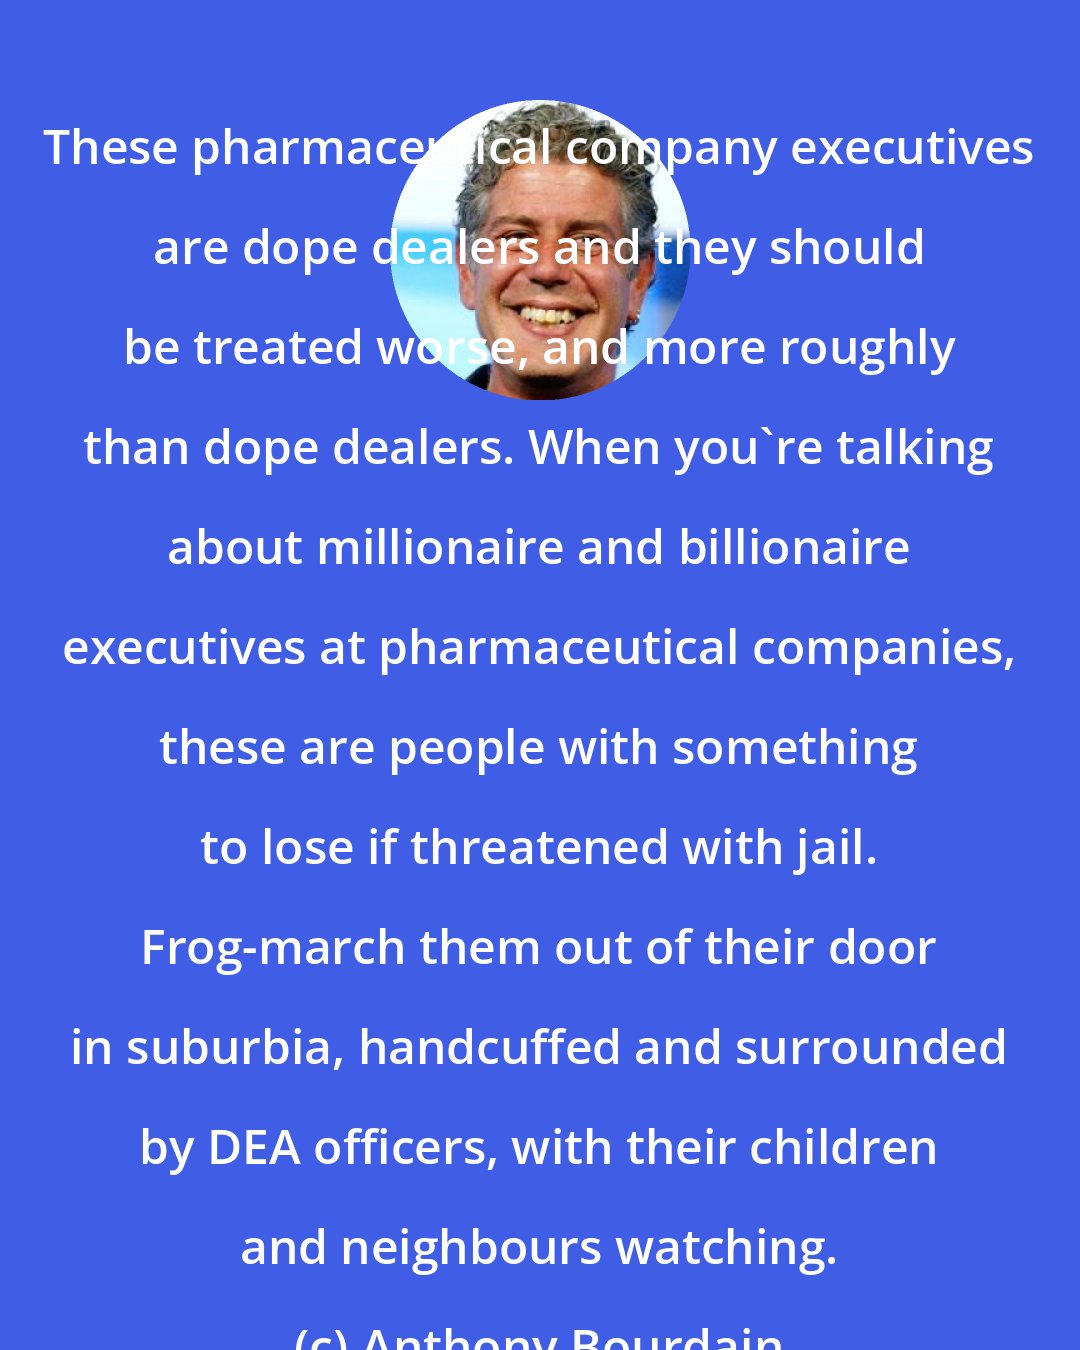 Anthony Bourdain: These pharmaceutical company executives are dope dealers and they should be treated worse, and more roughly than dope dealers. When you're talking about millionaire and billionaire executives at pharmaceutical companies, these are people with something to lose if threatened with jail. Frog-march them out of their door in suburbia, handcuffed and surrounded by DEA officers, with their children and neighbours watching.